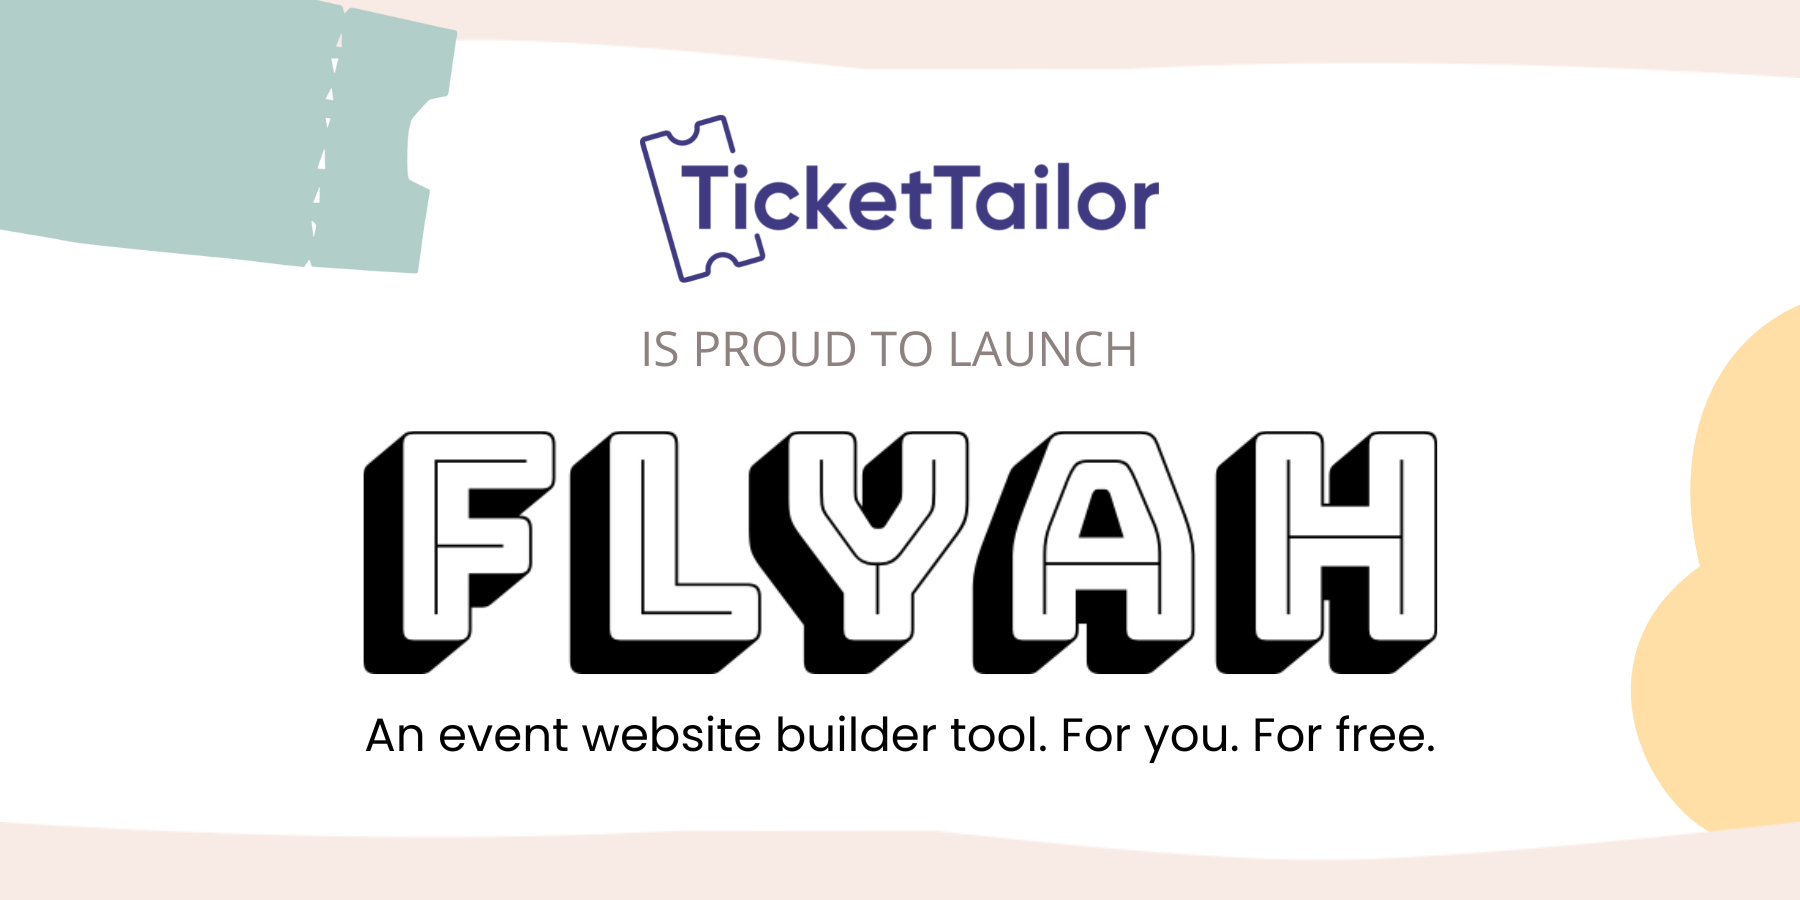 Ticket Tailor launches Flyah: a free website builder tool specifically for event creators